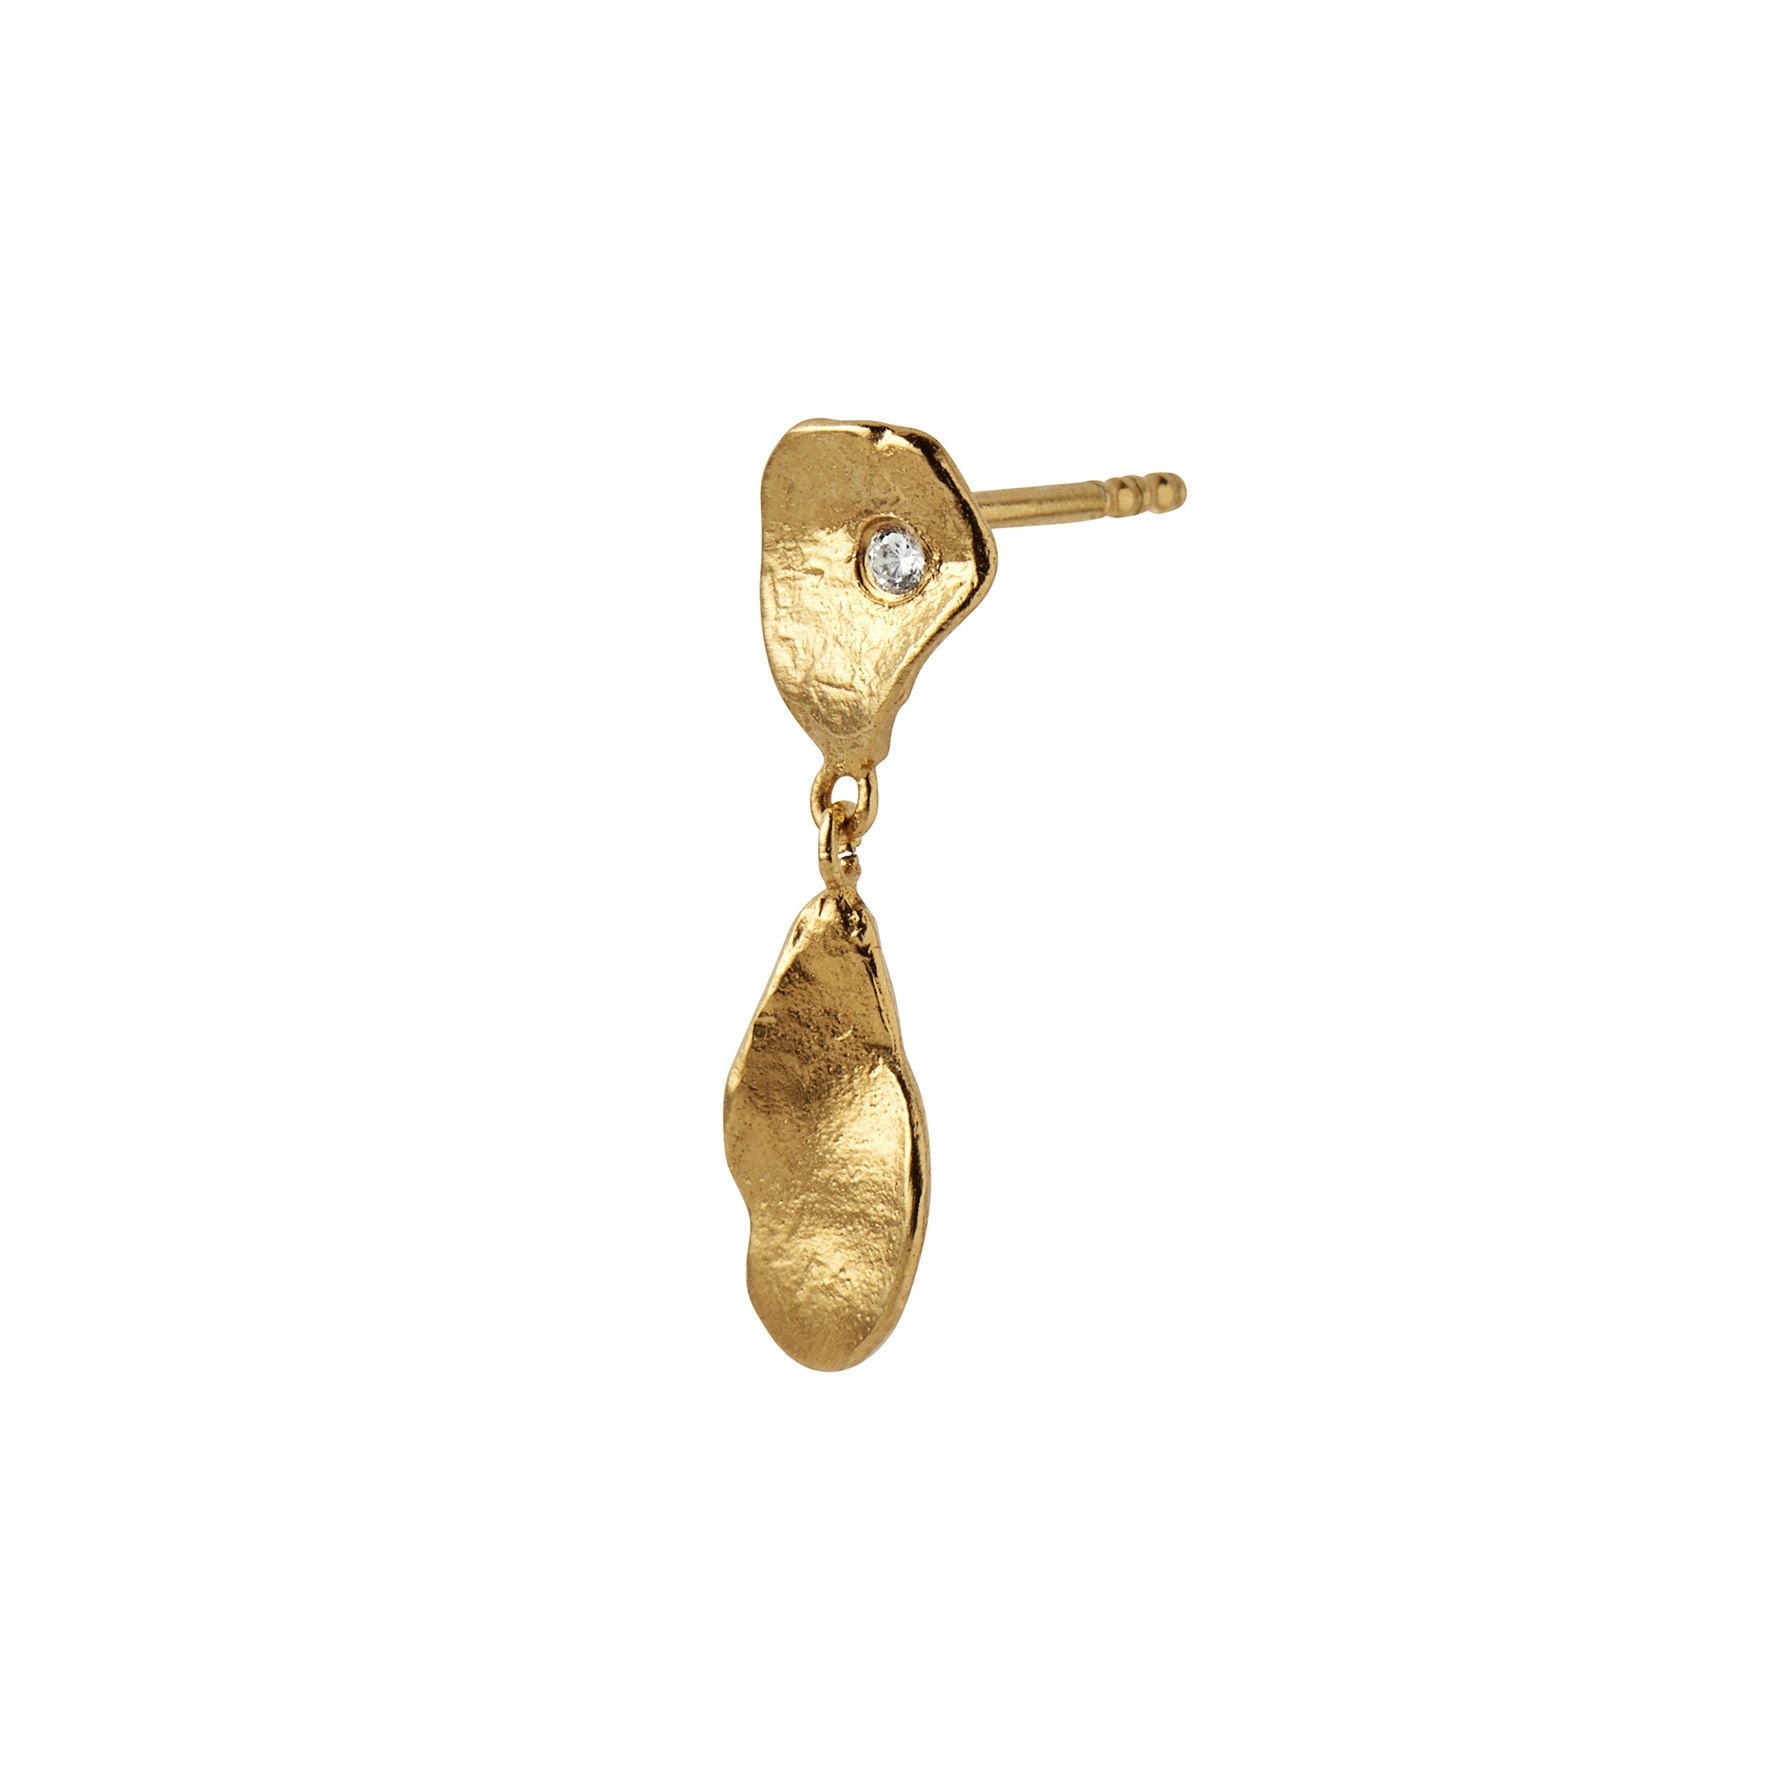 Clear Sea Earring With Stone from STINE A Jewelry in Goldplated-Silver Sterling 925